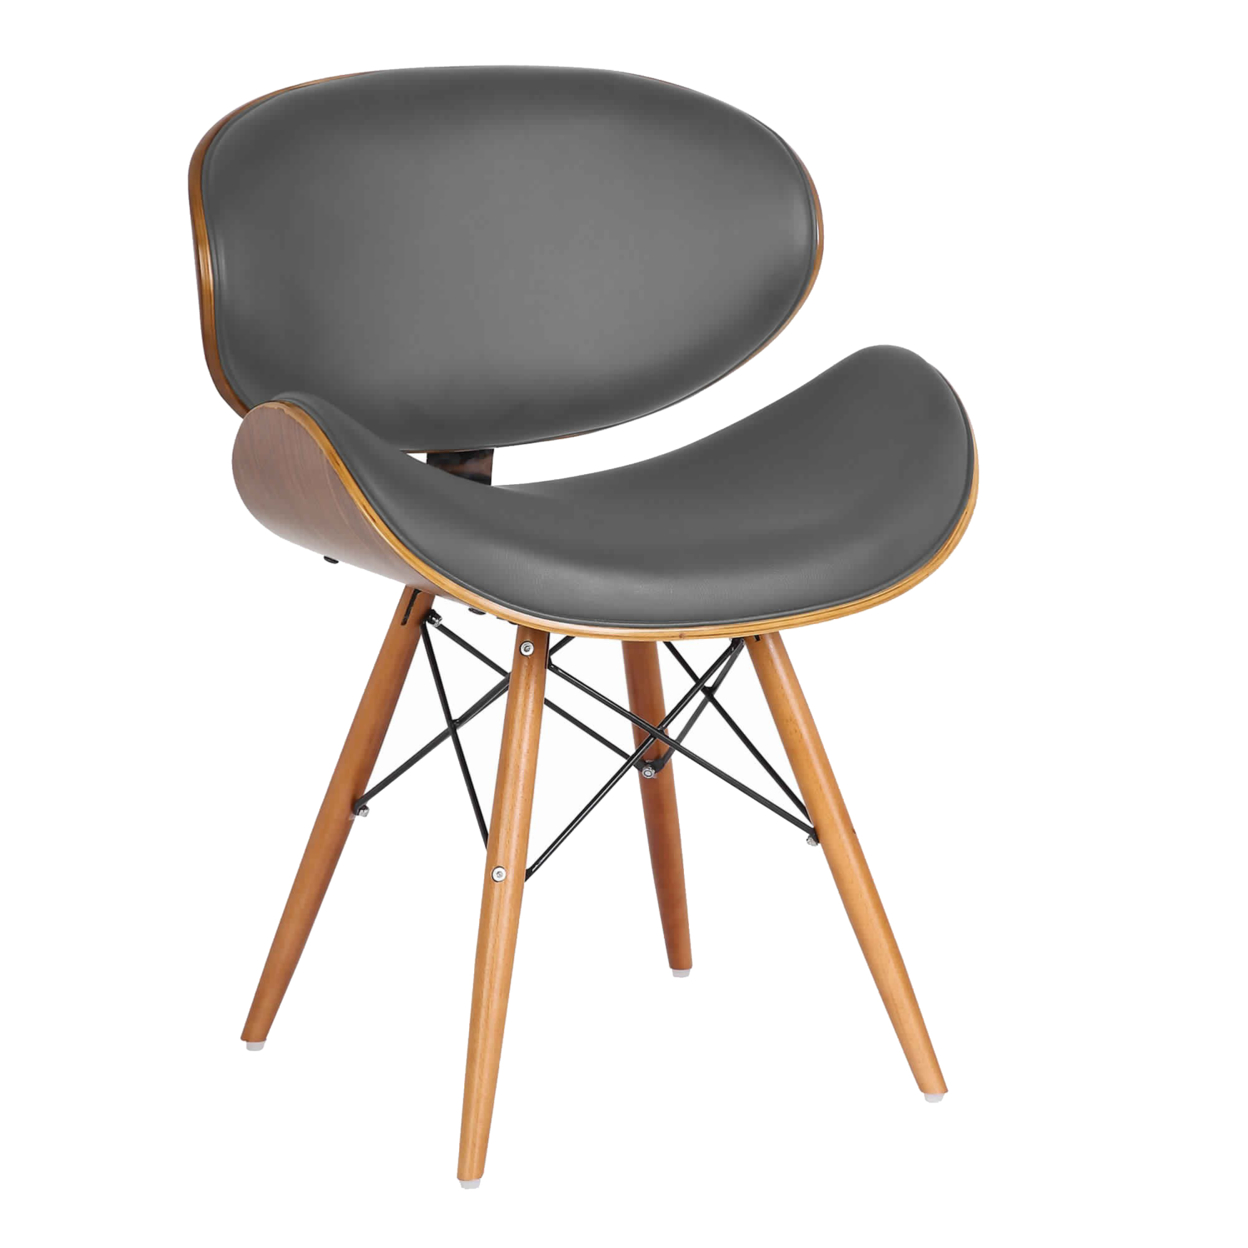 Leatherette Mid Century Curved Seat Dining Chair, Brown And Gray- Saltoro Sherpi